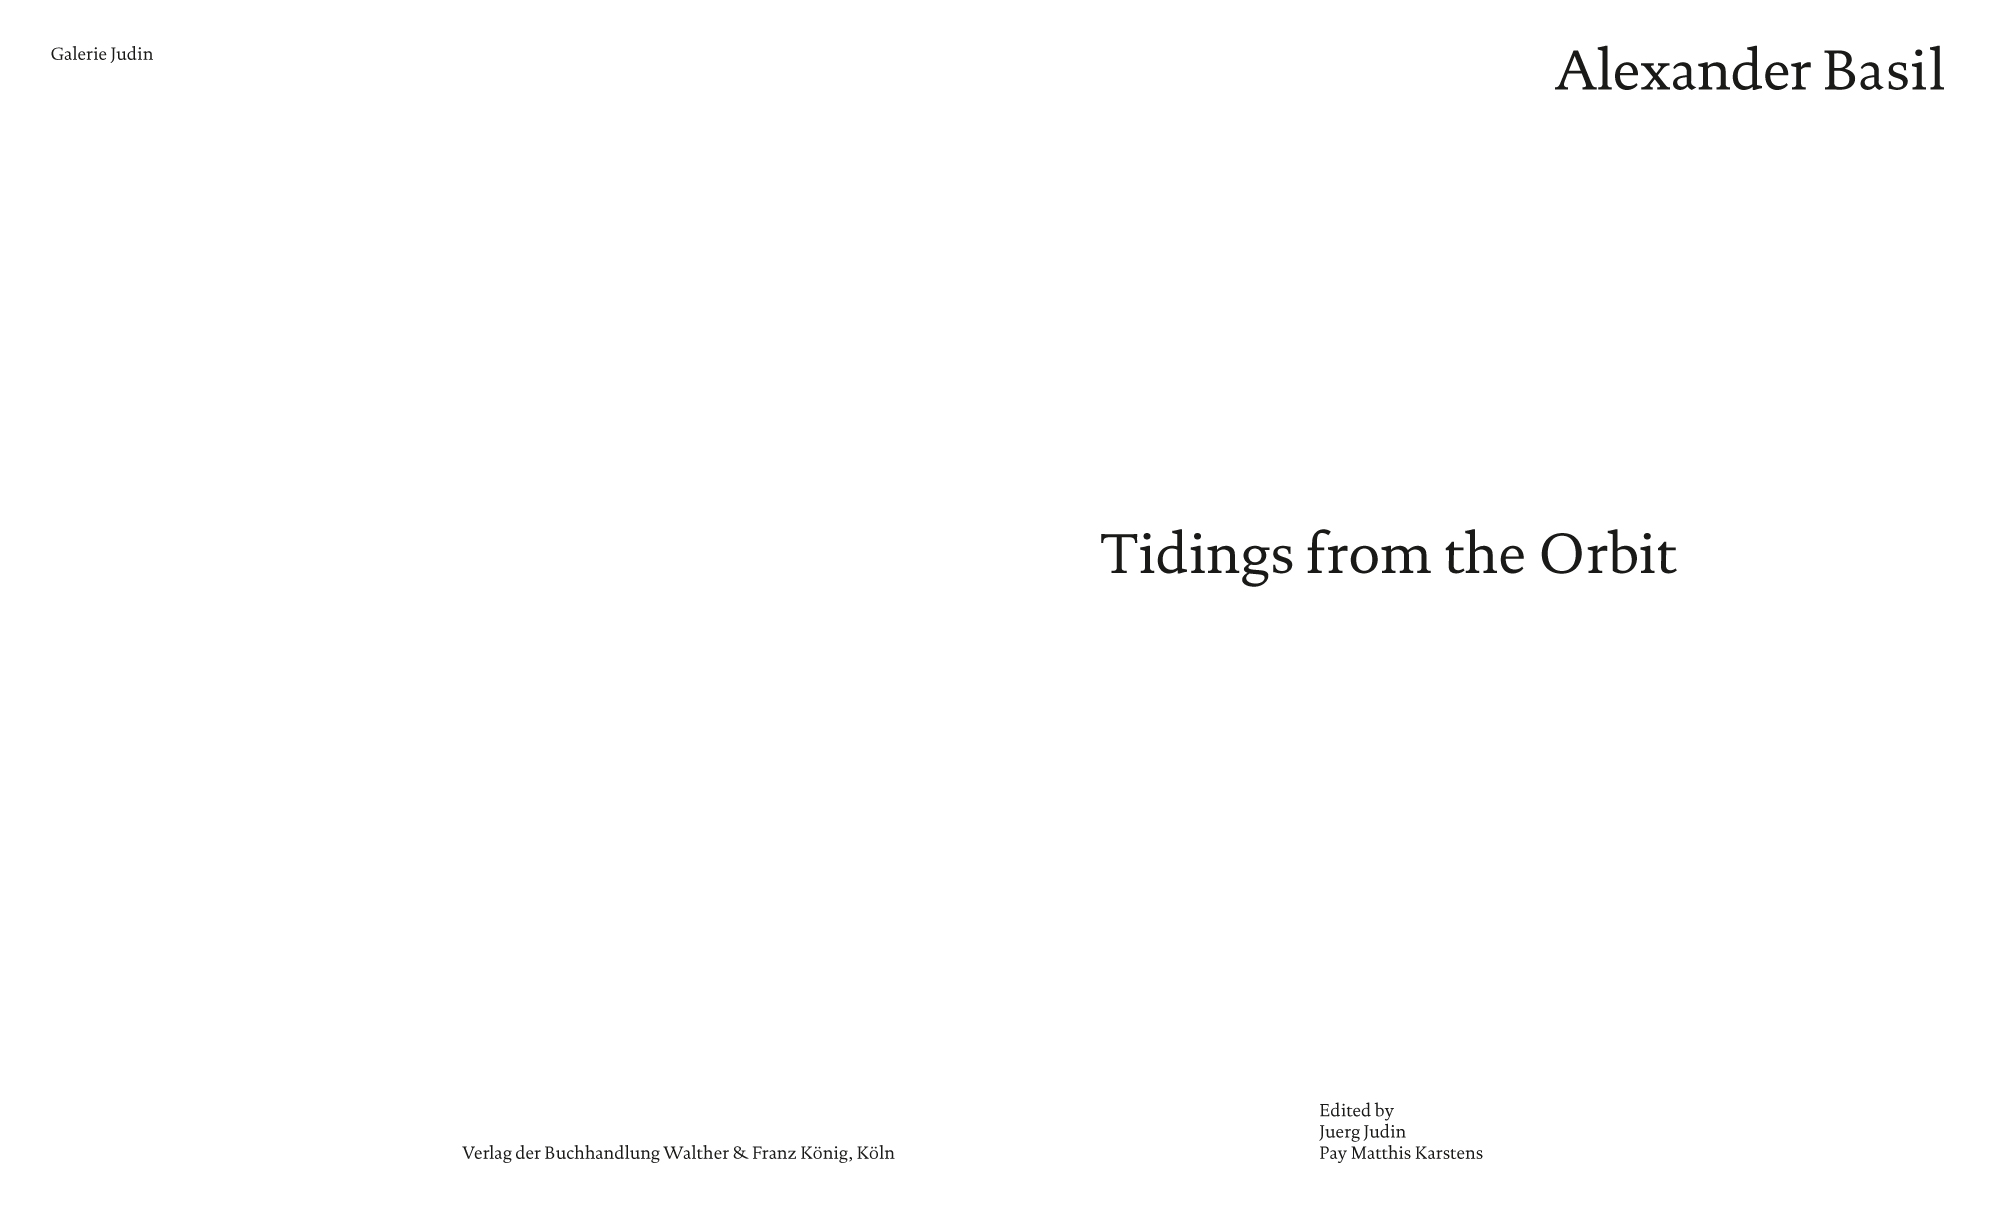 Alexander Basil catalogue by Galerie Judin Tidings from the Orbit